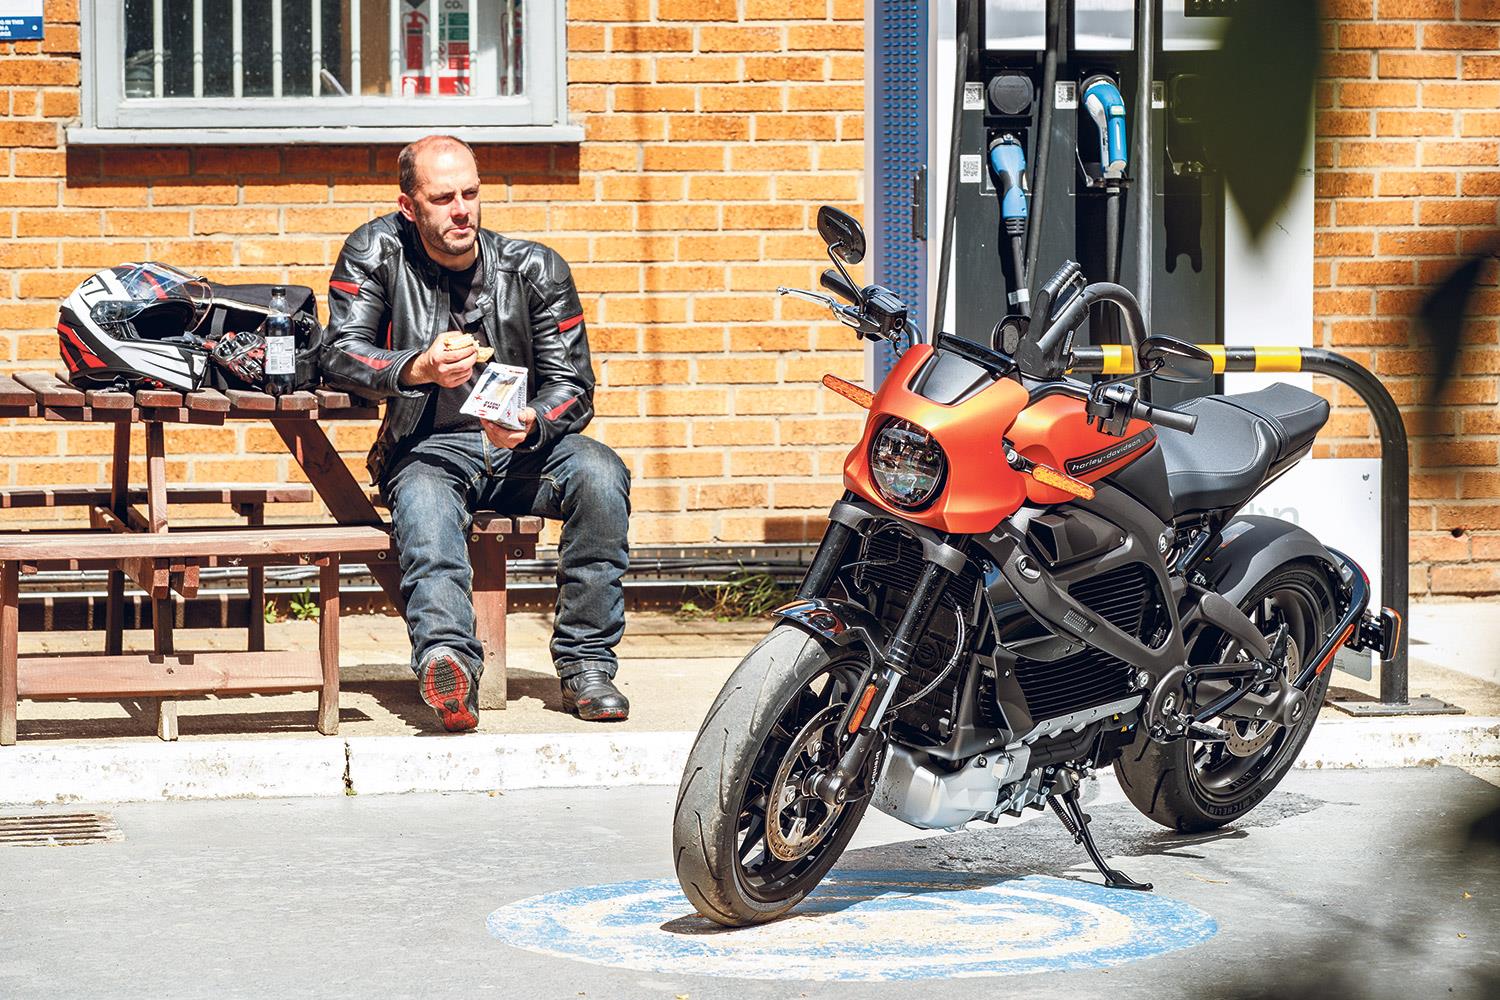 Bikes not chopped: Reports of the death of motorcycles ‘greatly exaggerated’